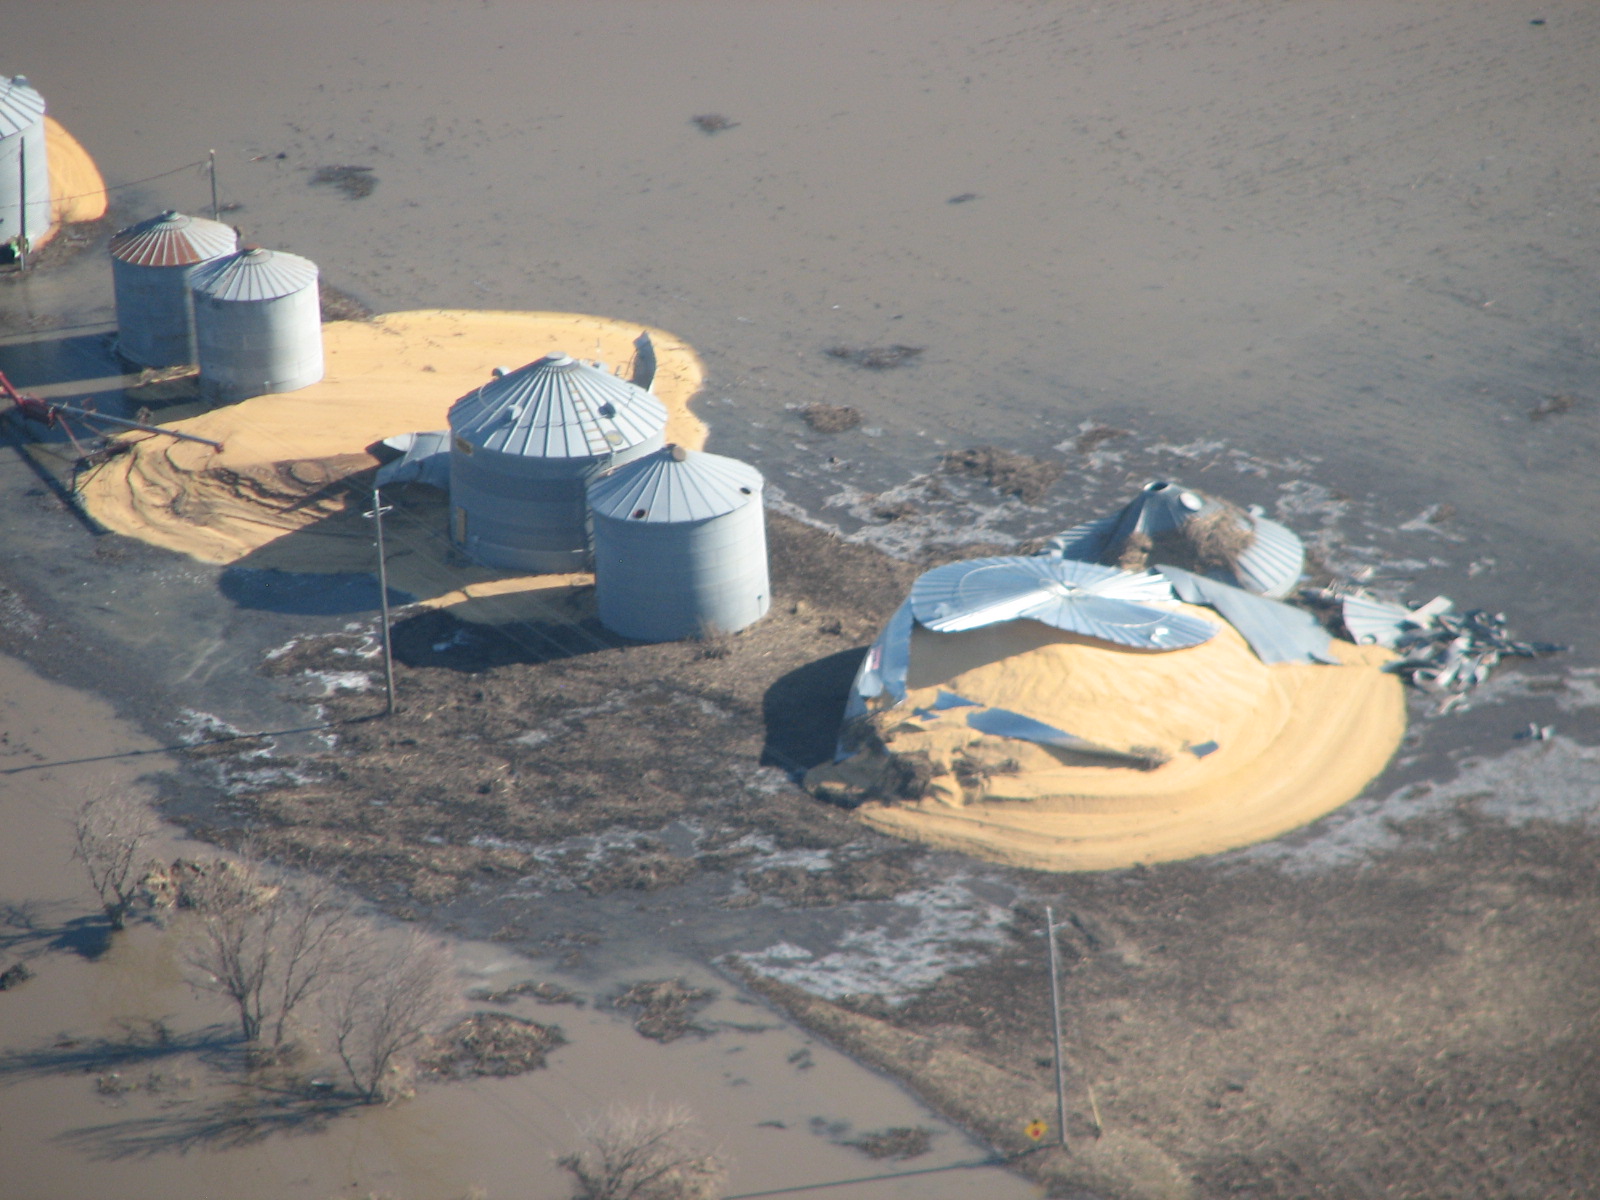 Bins bursting open with corn due to saturation with flood water.